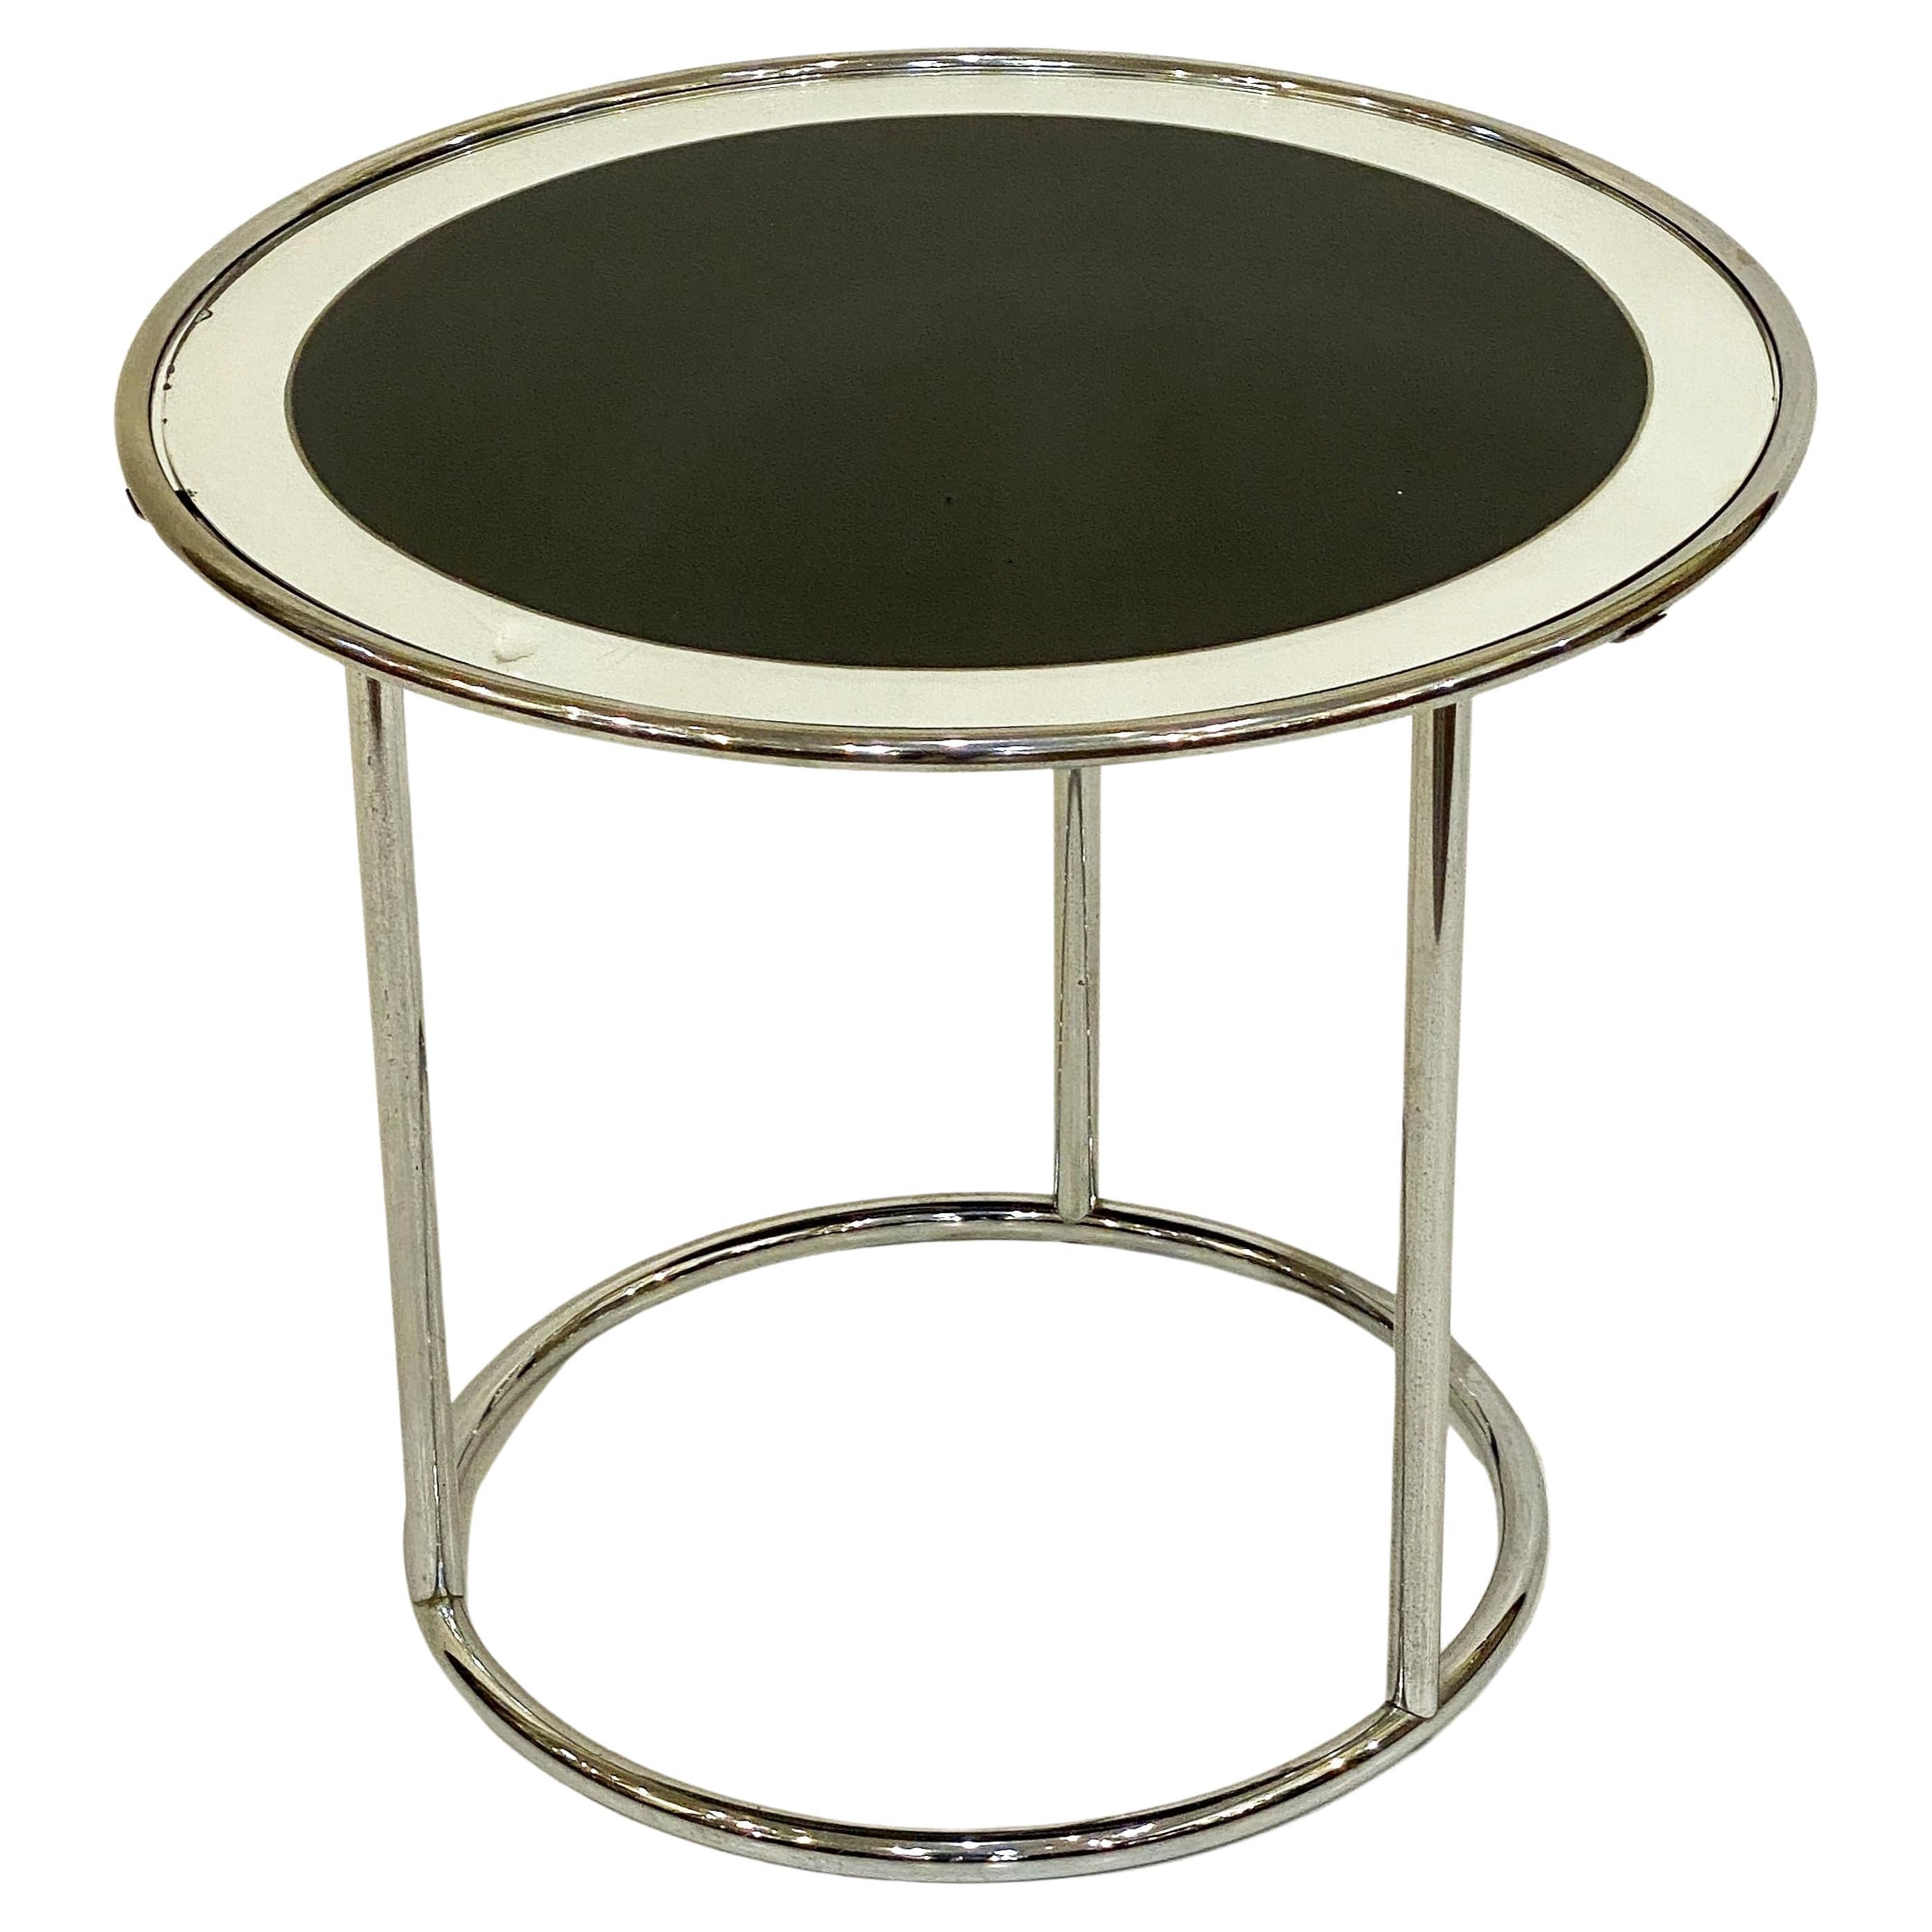 Art Deco Round Drinks Table of Chrome and Mirrored Glass from England For Sale